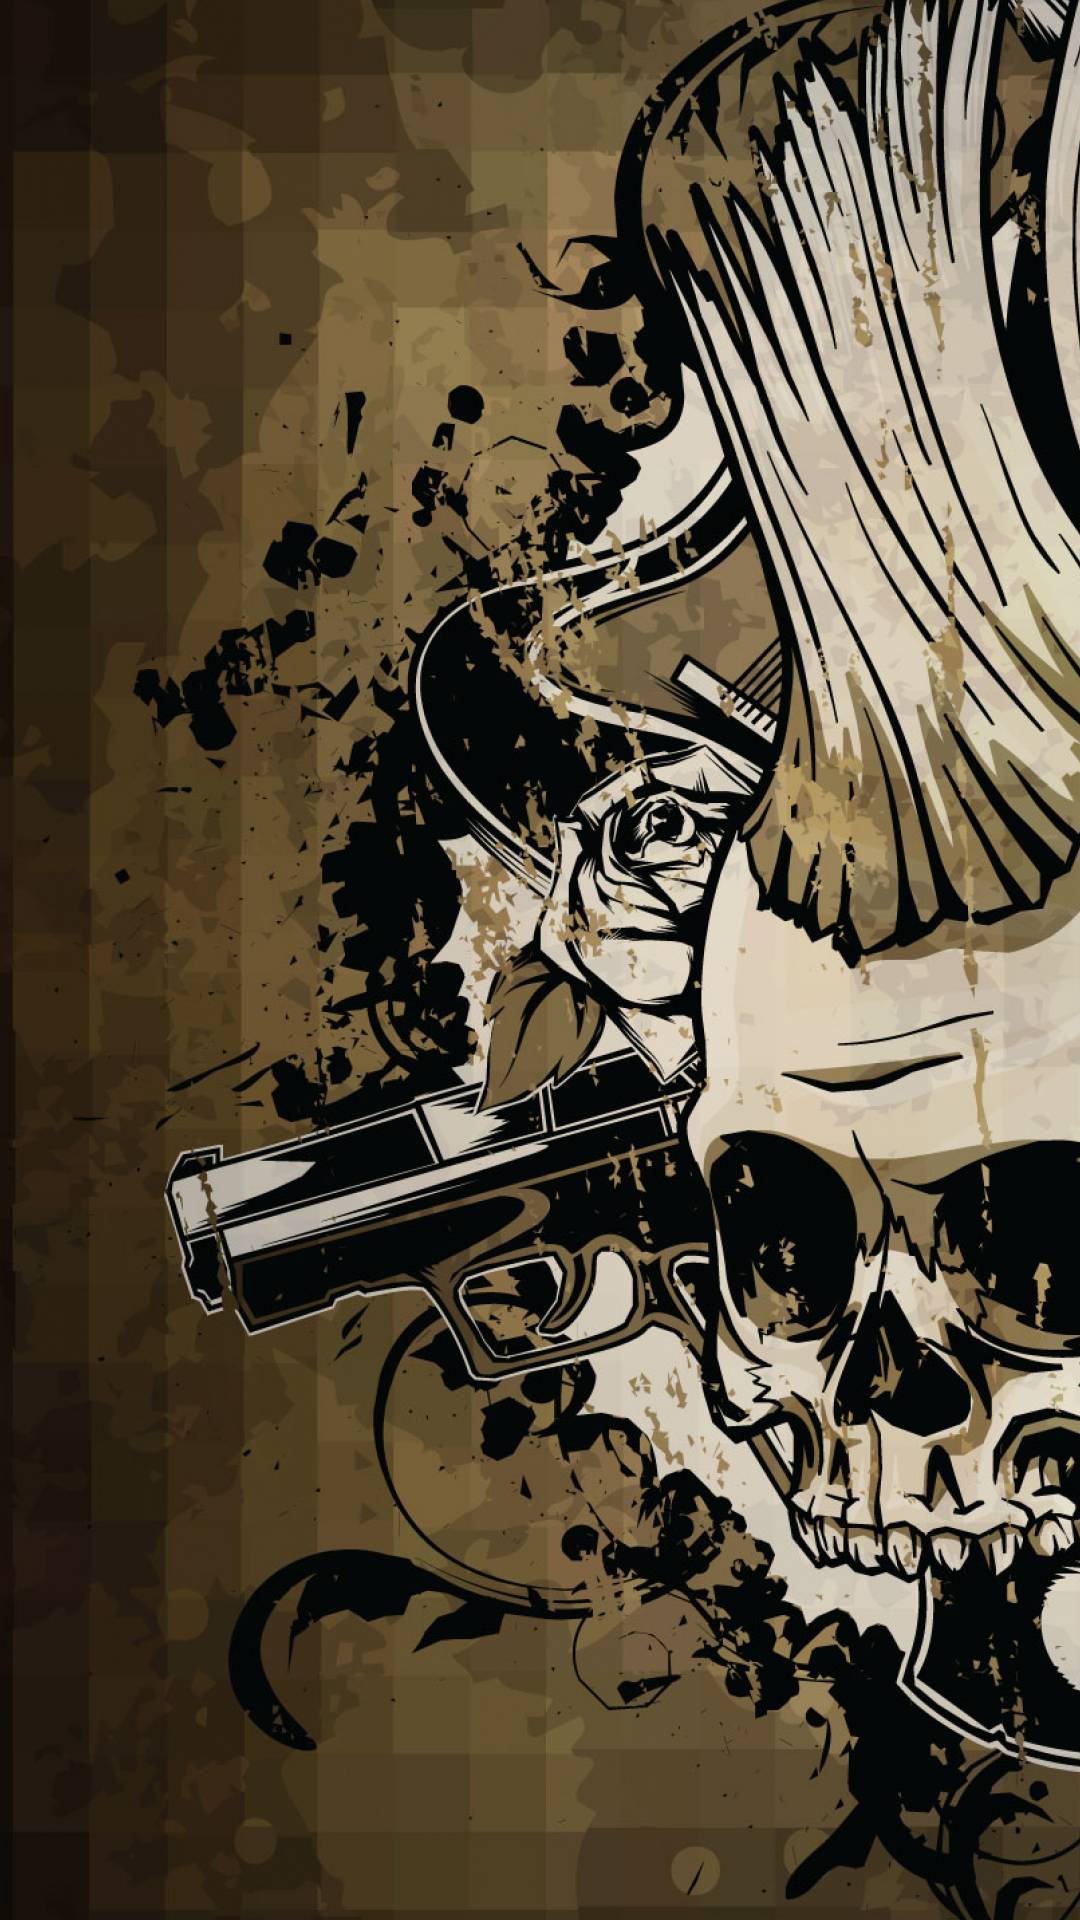 free download htc htc one wallpapers brown skulls n guns android wallpapers 1080x1920 for your desktop mobile tablet explore 46 android n wallpapers android central wallpaper best free wallpapers free download htc htc one wallpapers